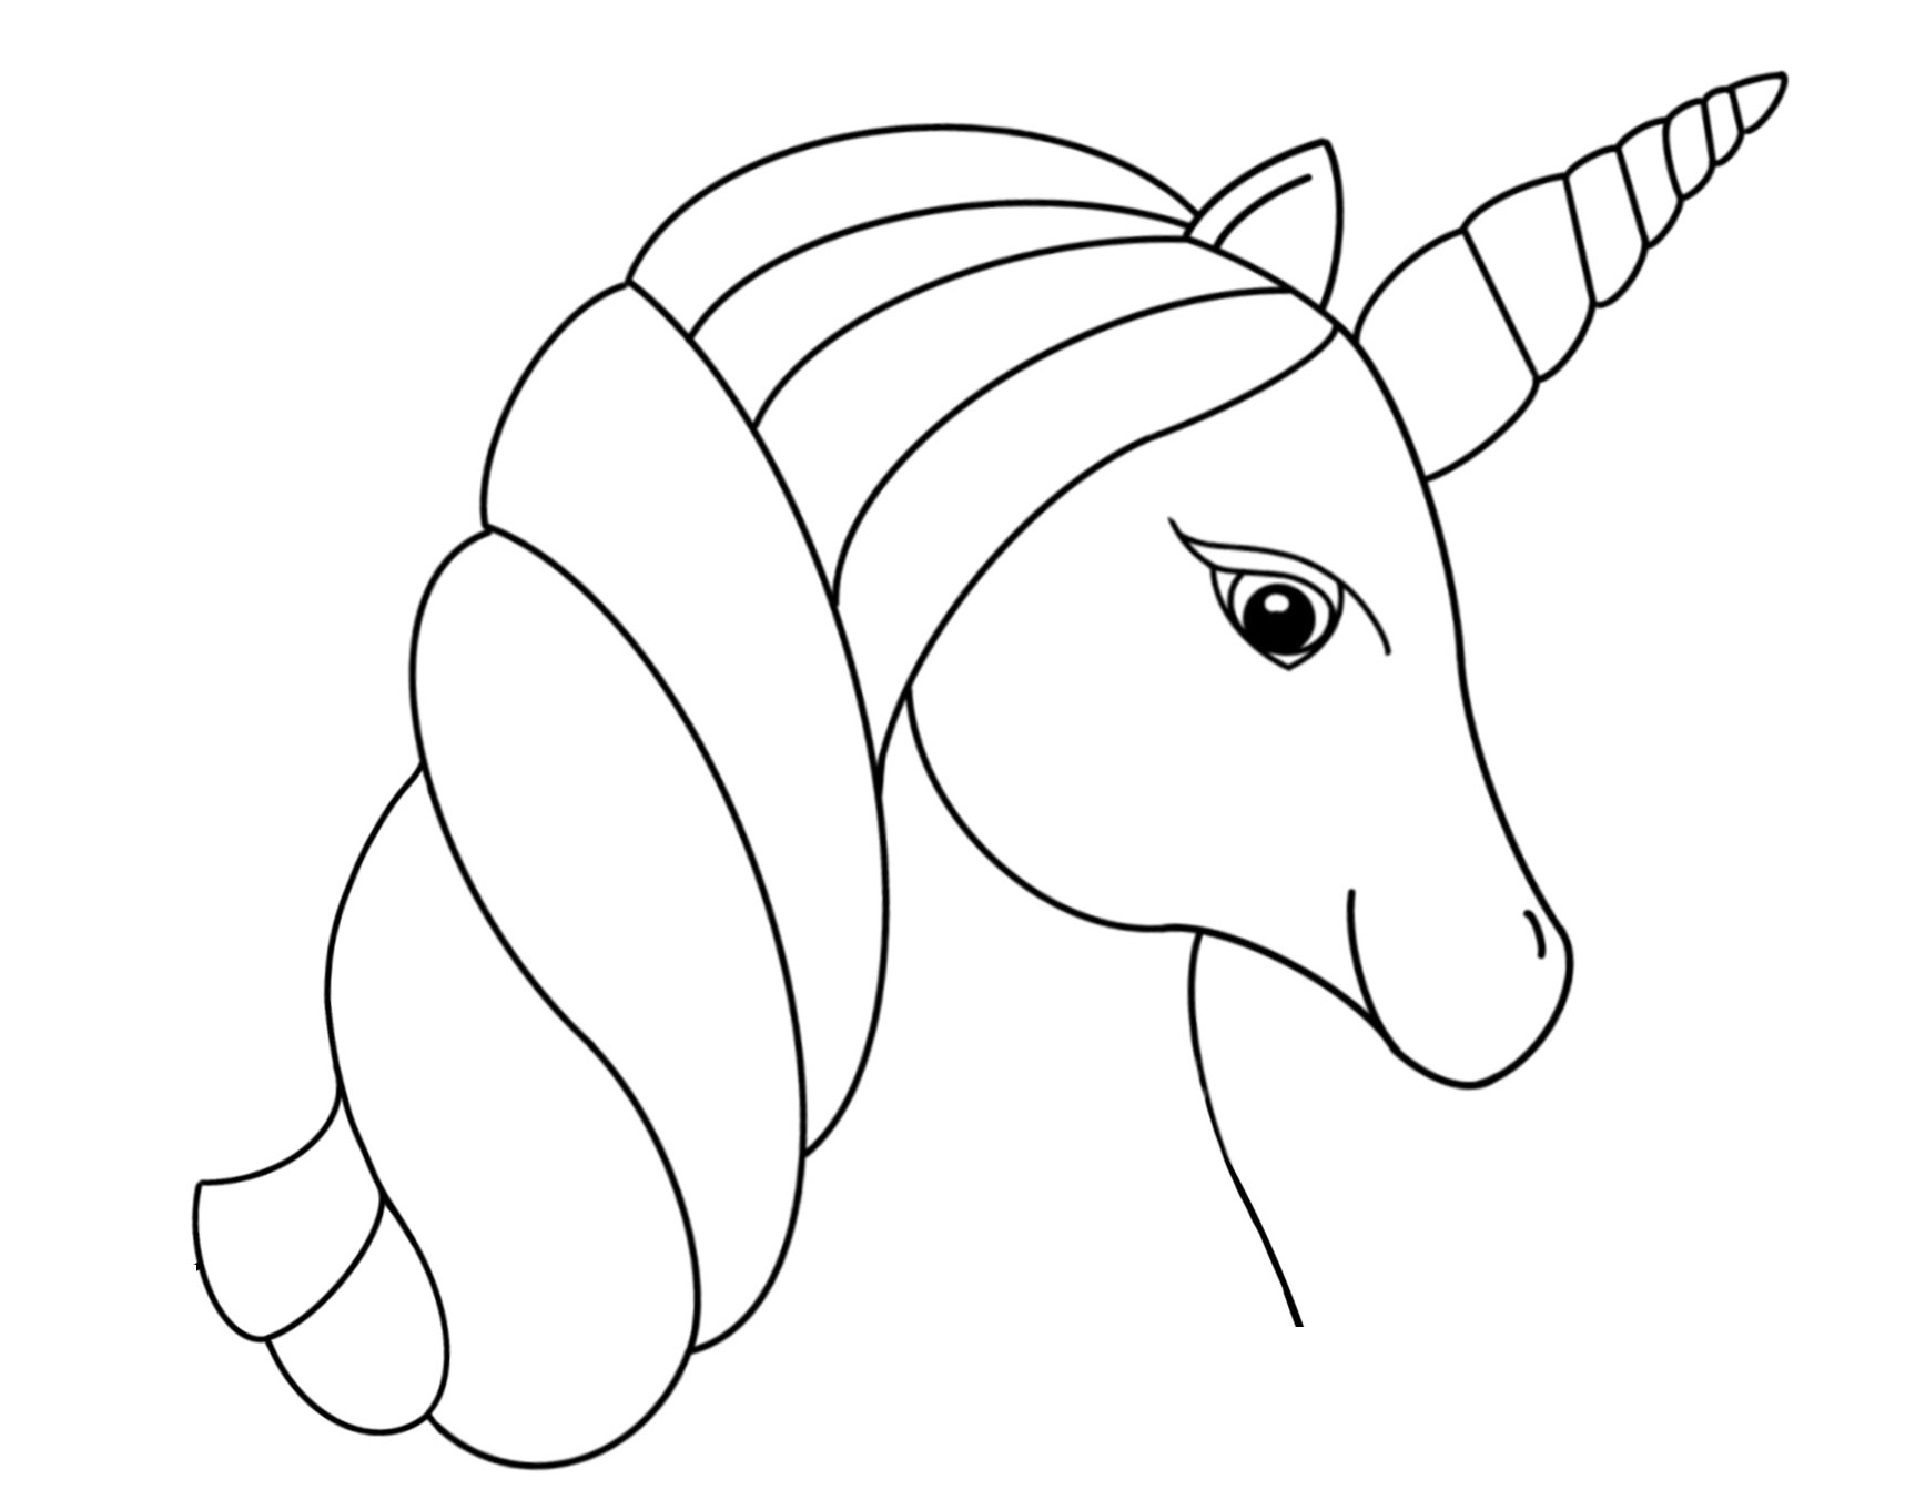 Printable Unicorn Face Coloring Page for kids.